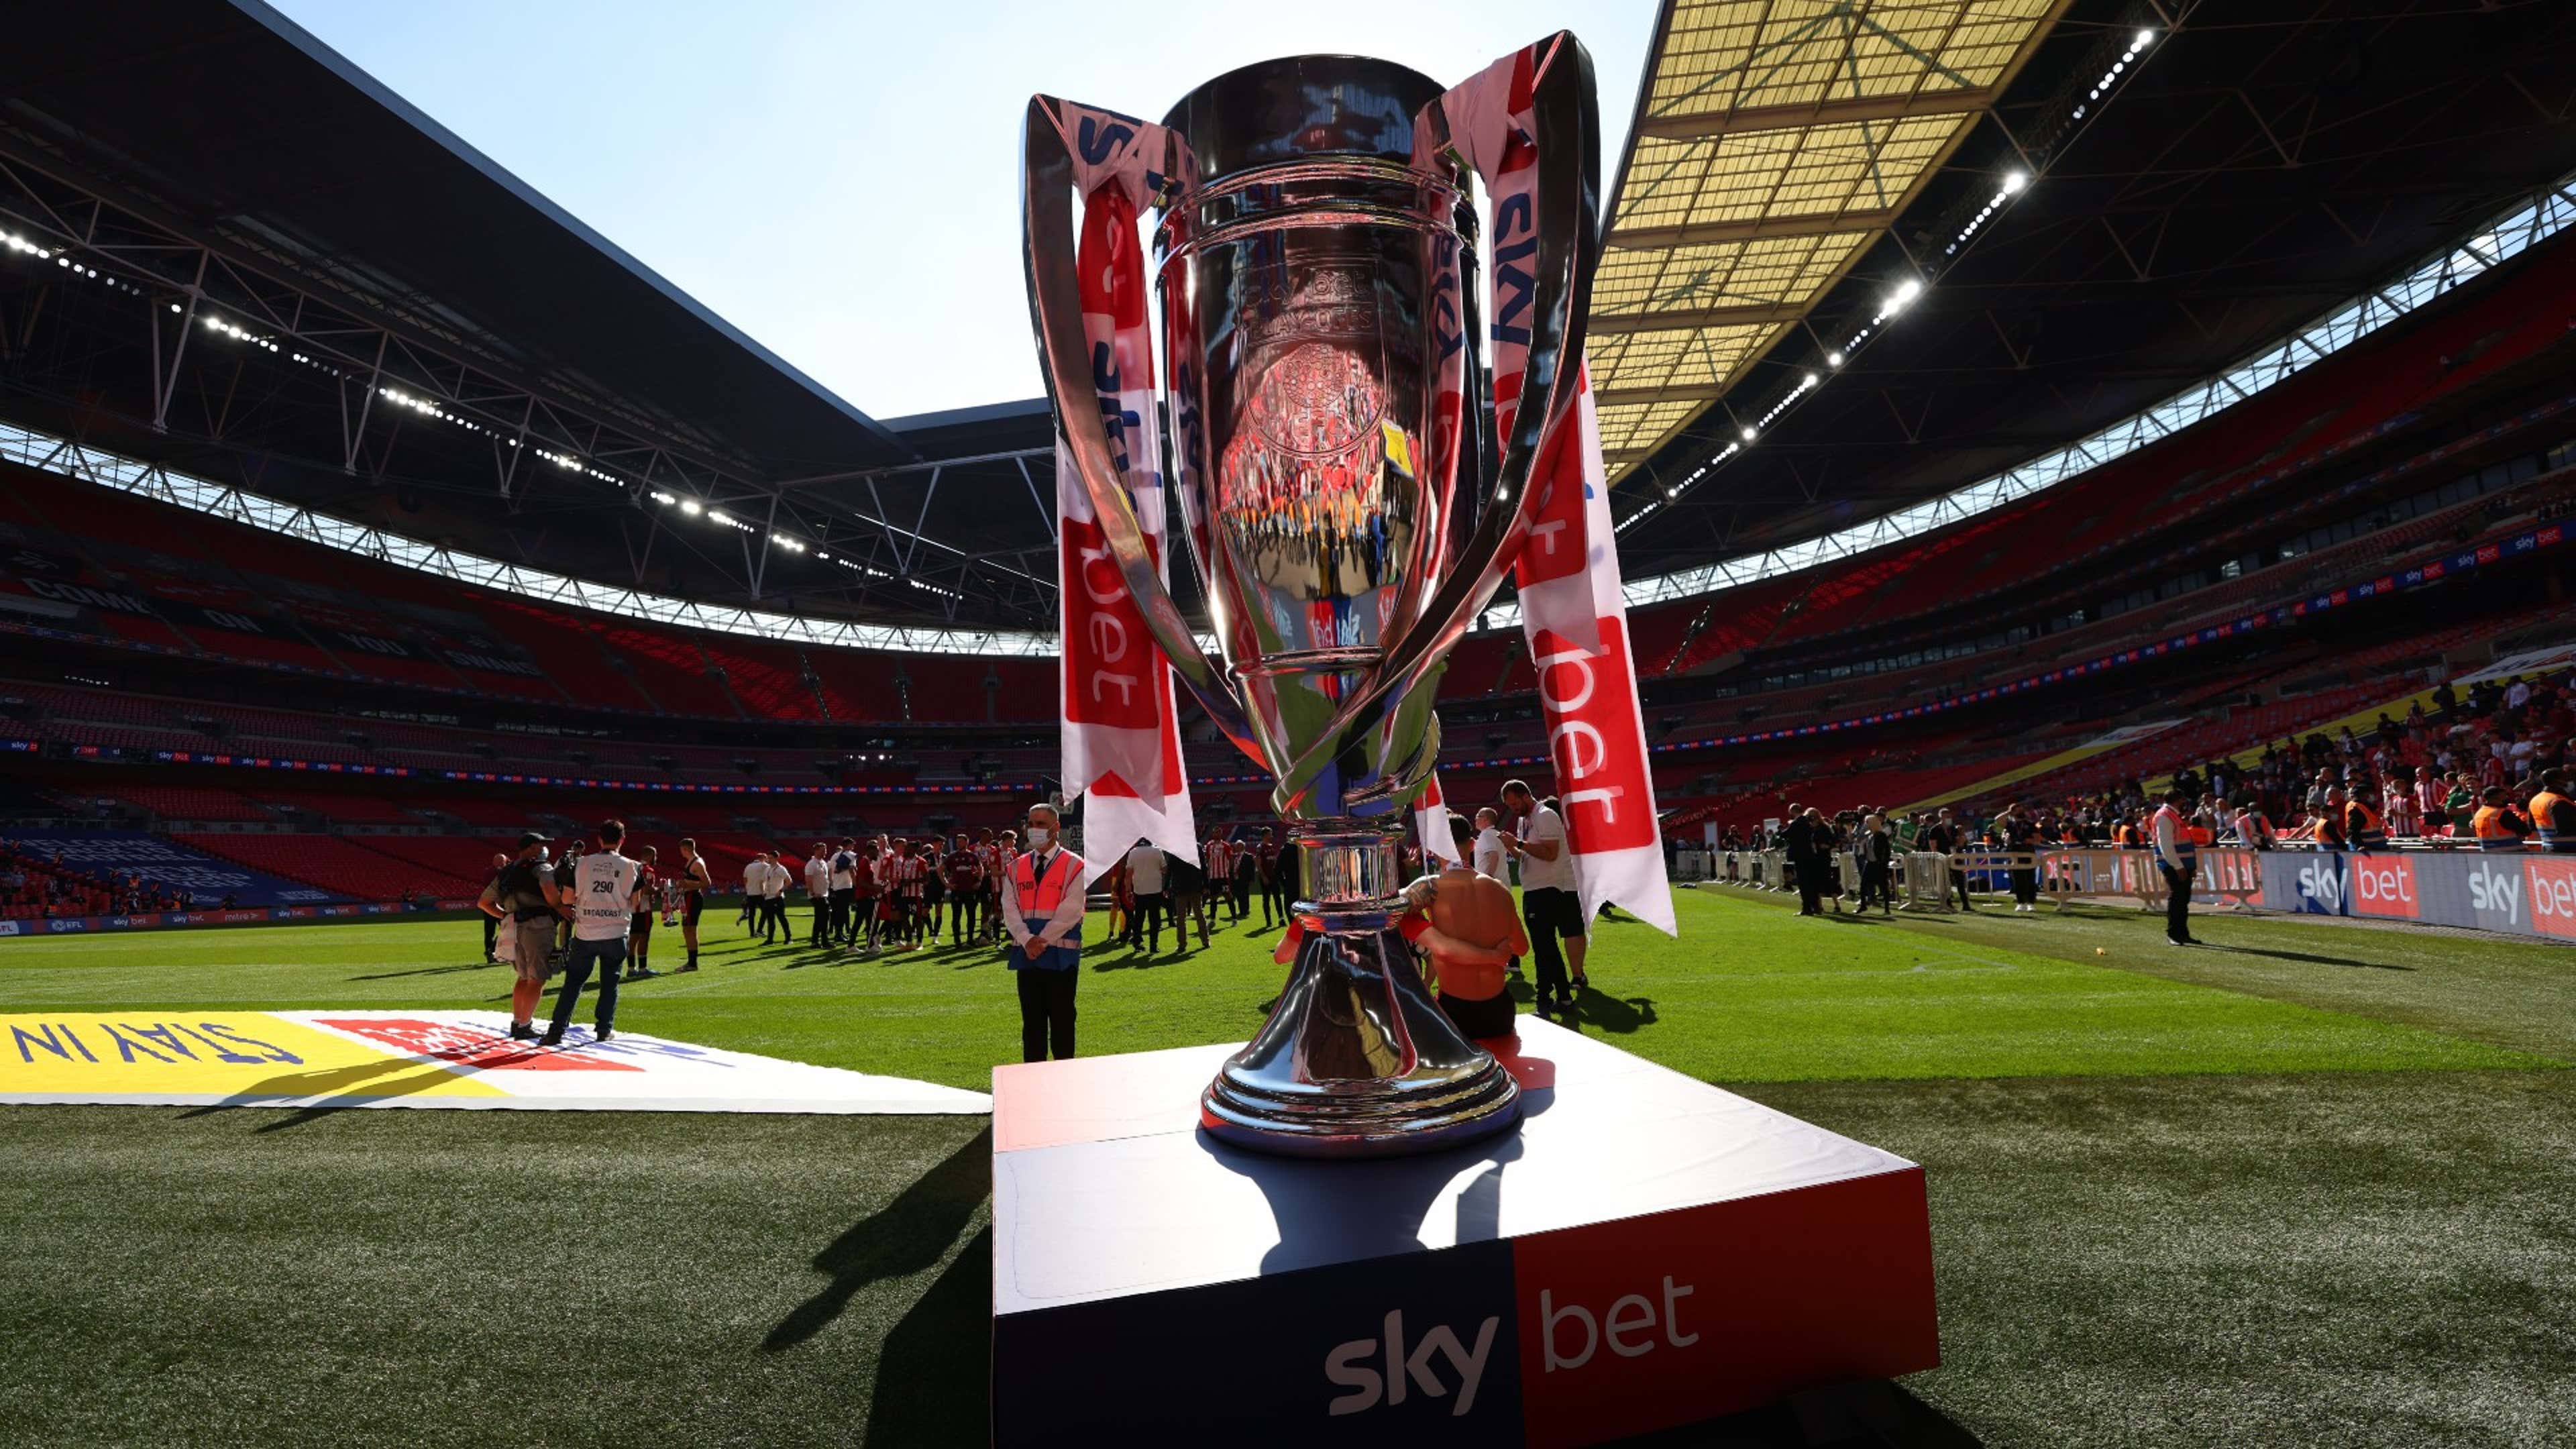 Championship final to kick-off day before final day of Premier